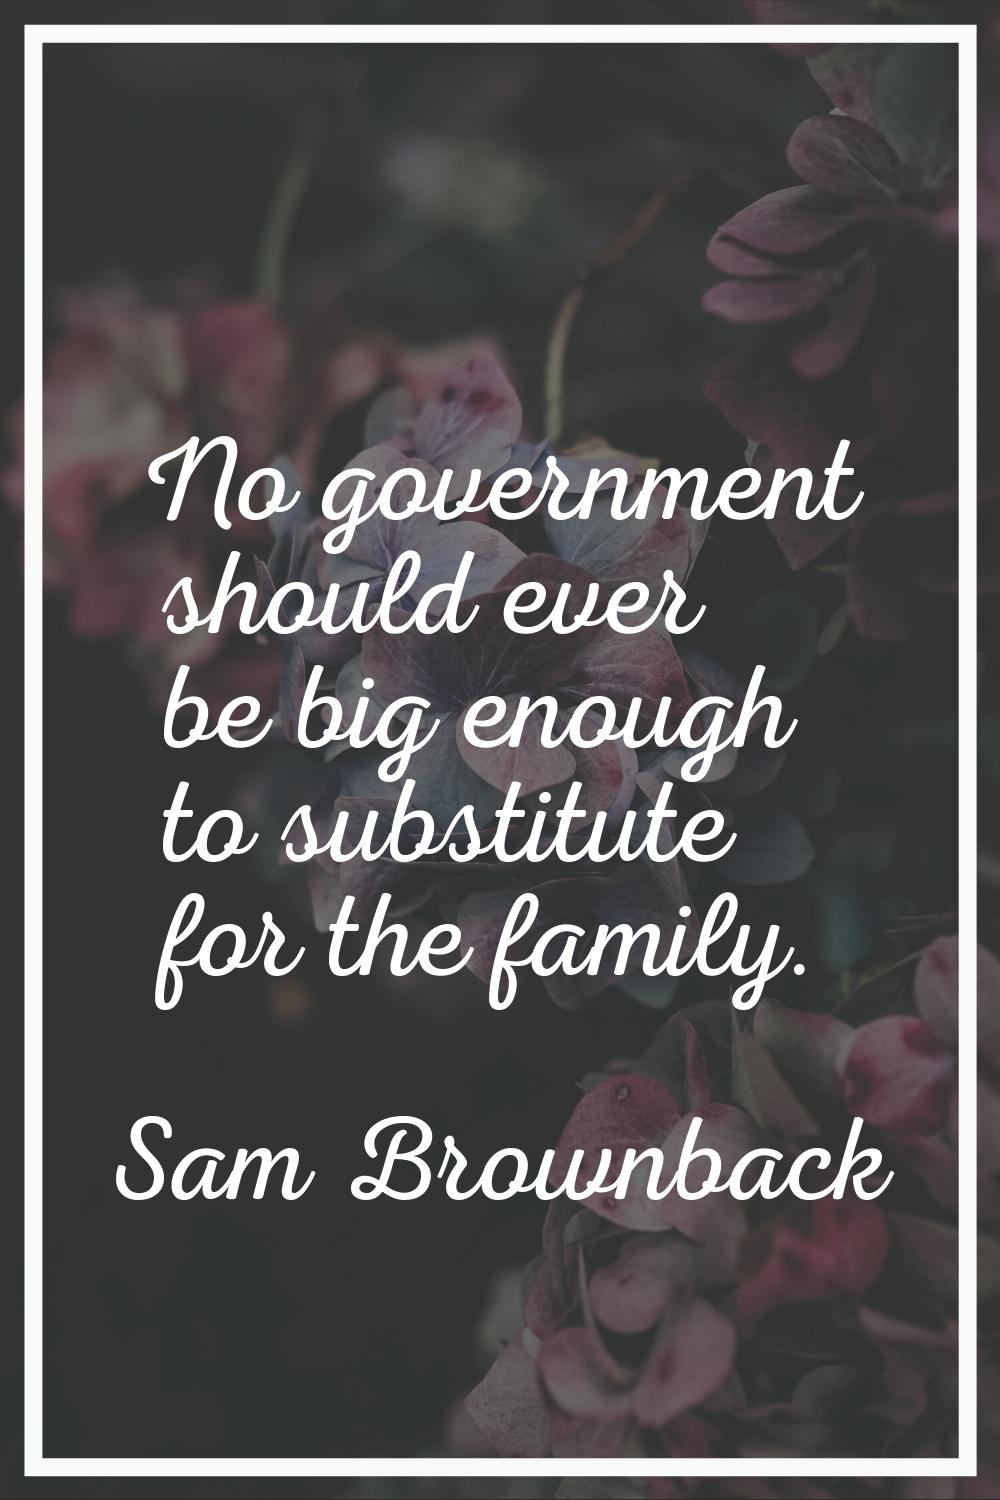 No government should ever be big enough to substitute for the family.